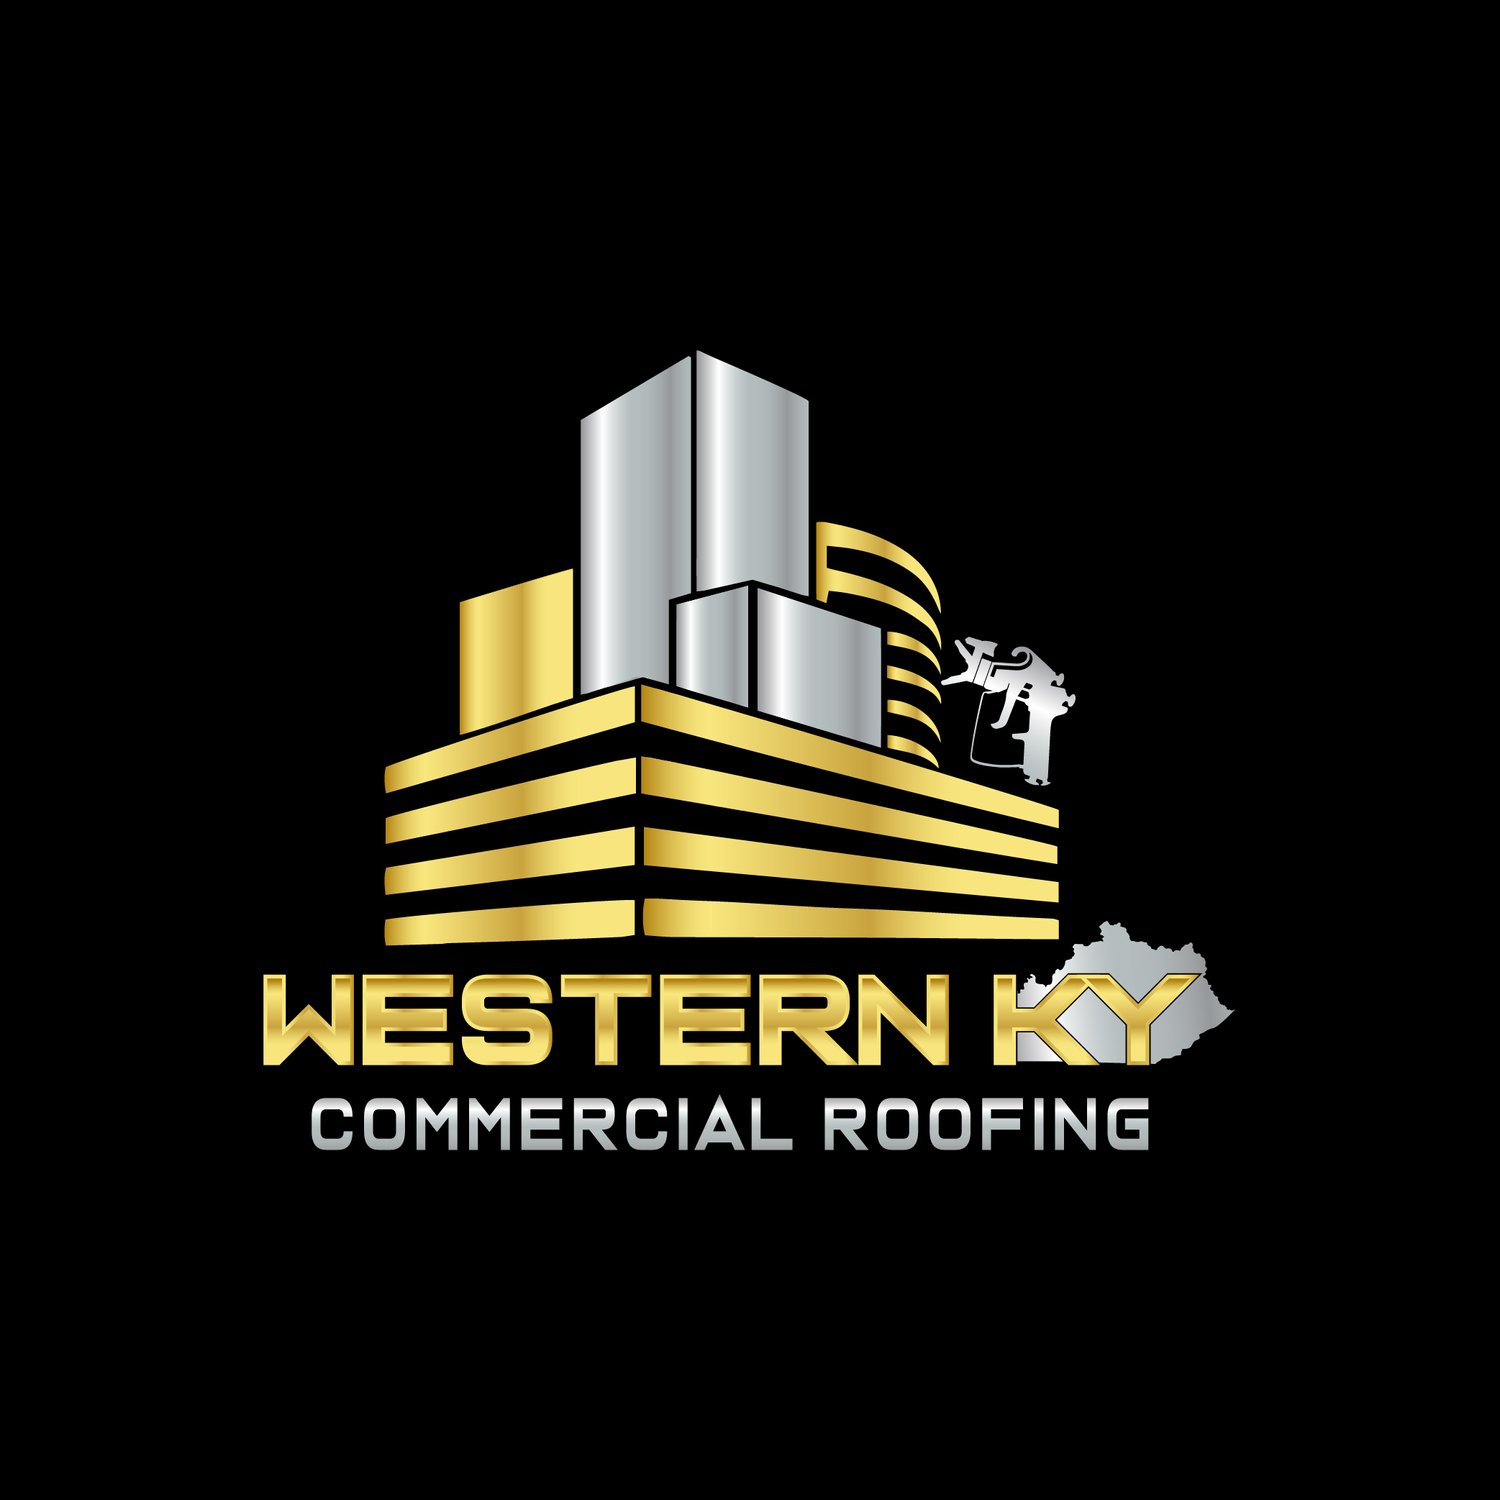 Commercial Roofing done right!